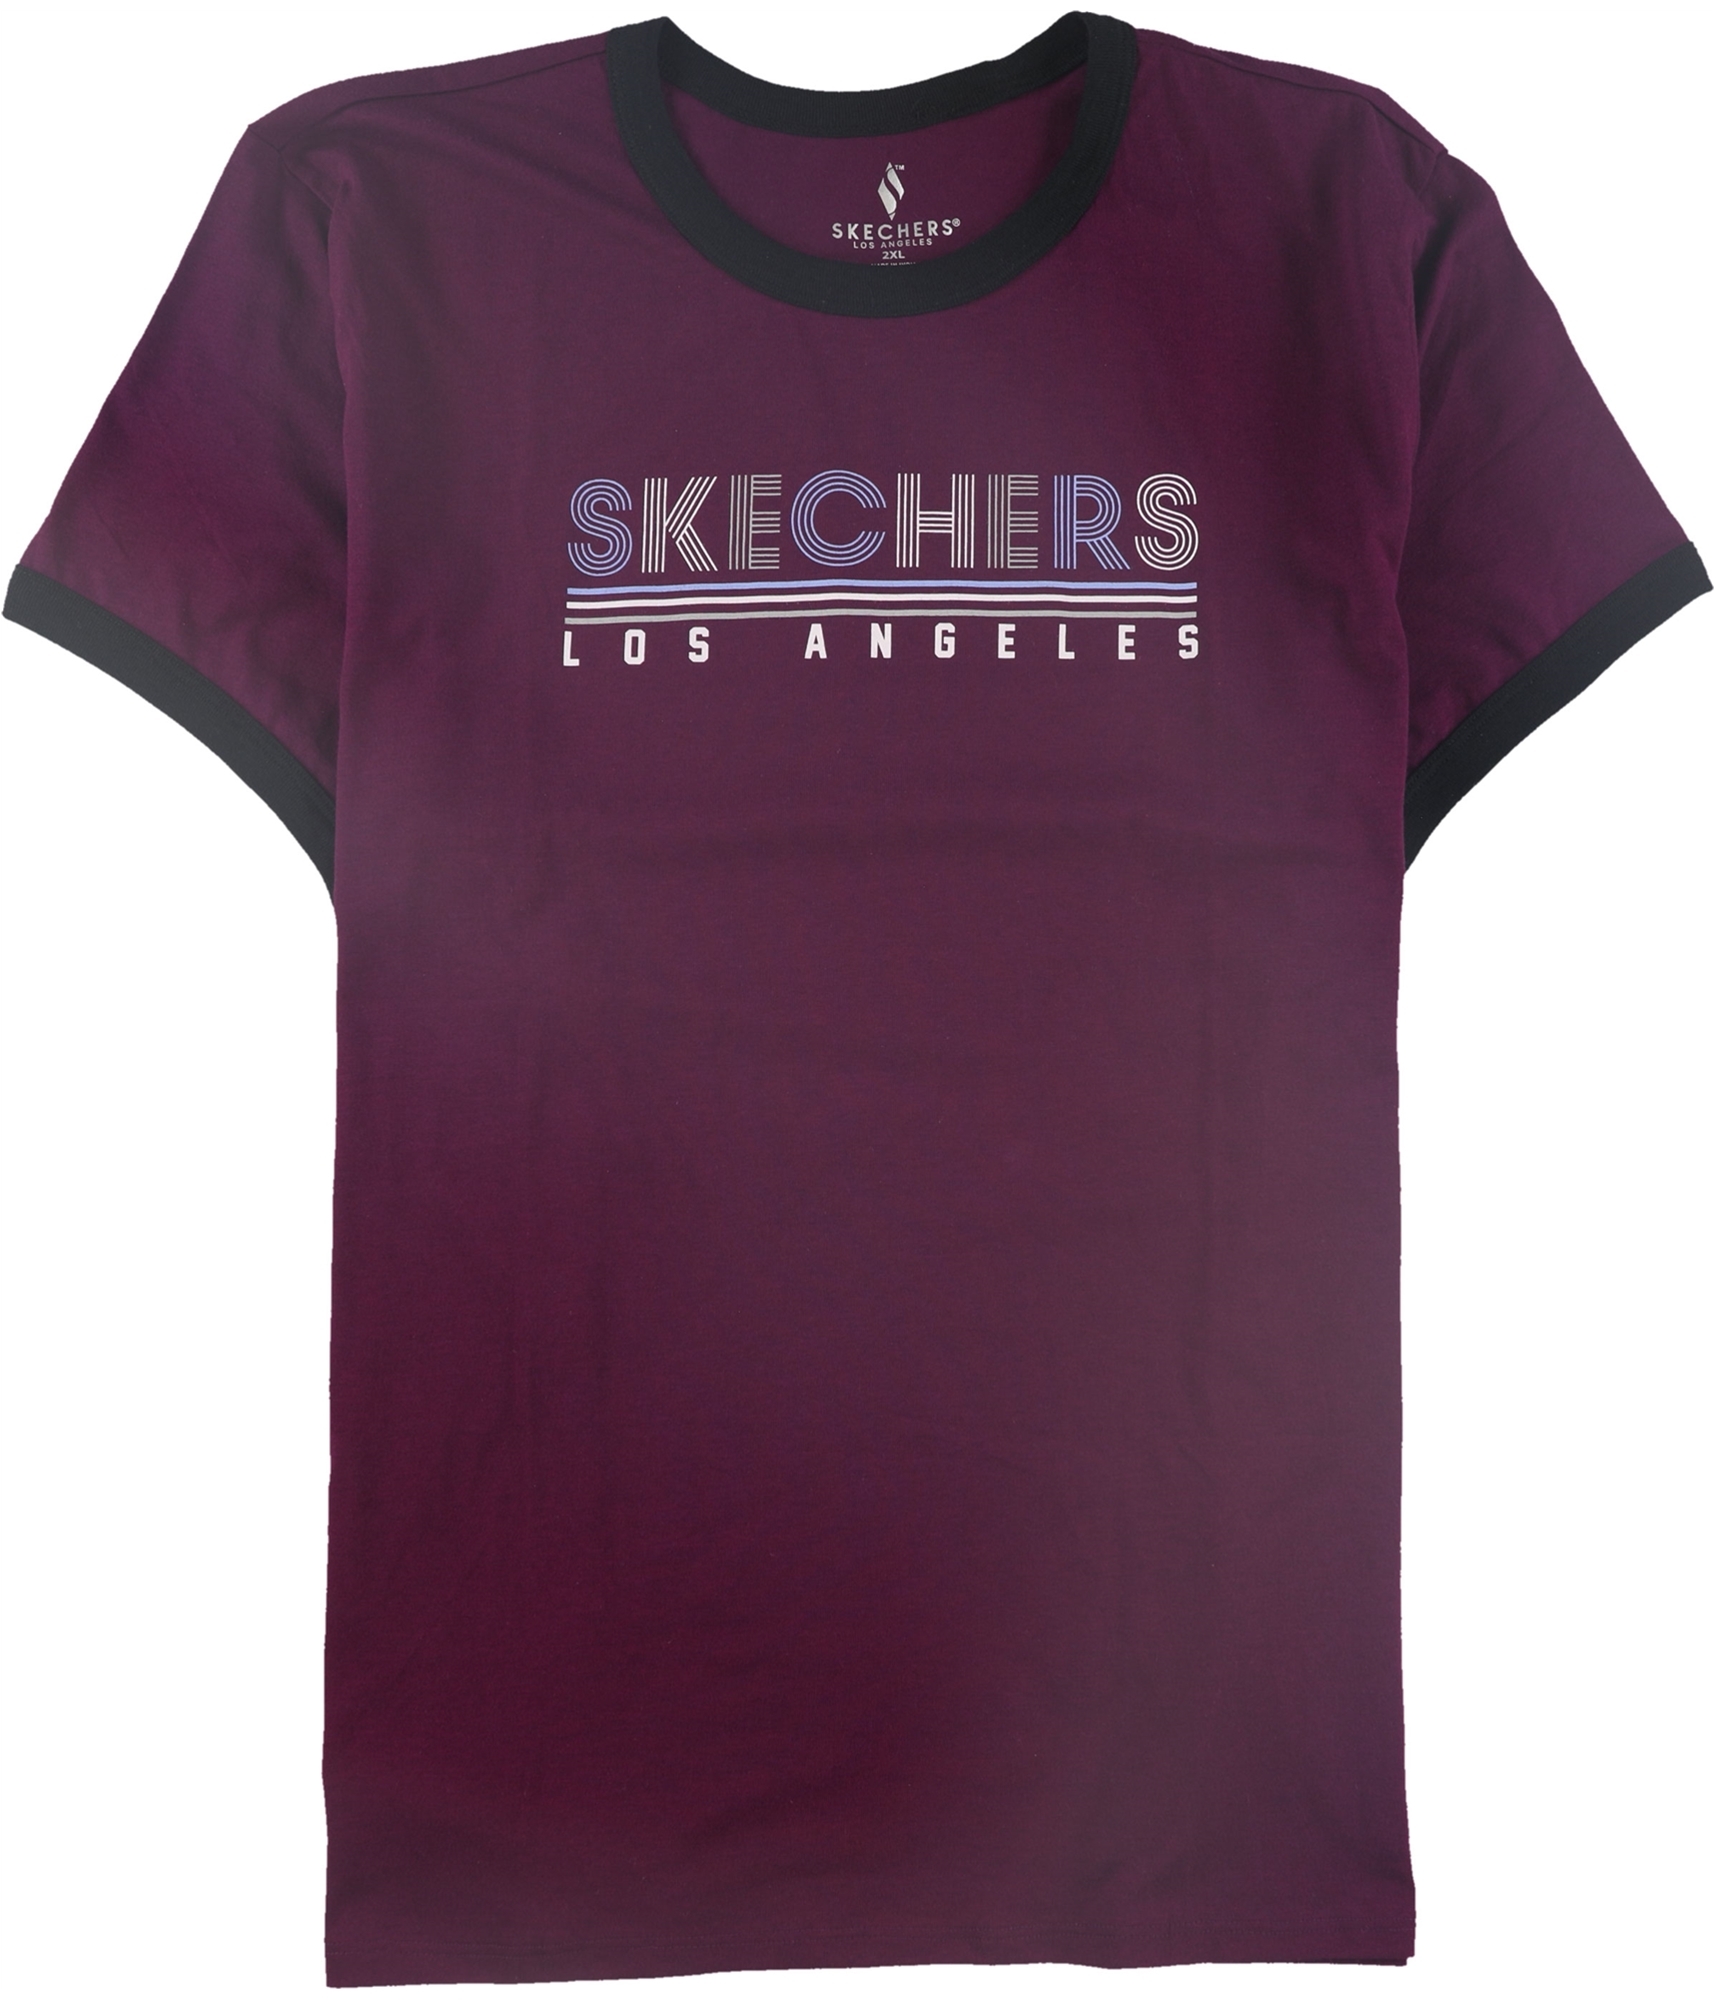 Buy a Skechers Womens Angeles | T-Shirt Graphic Tagsweekly Los